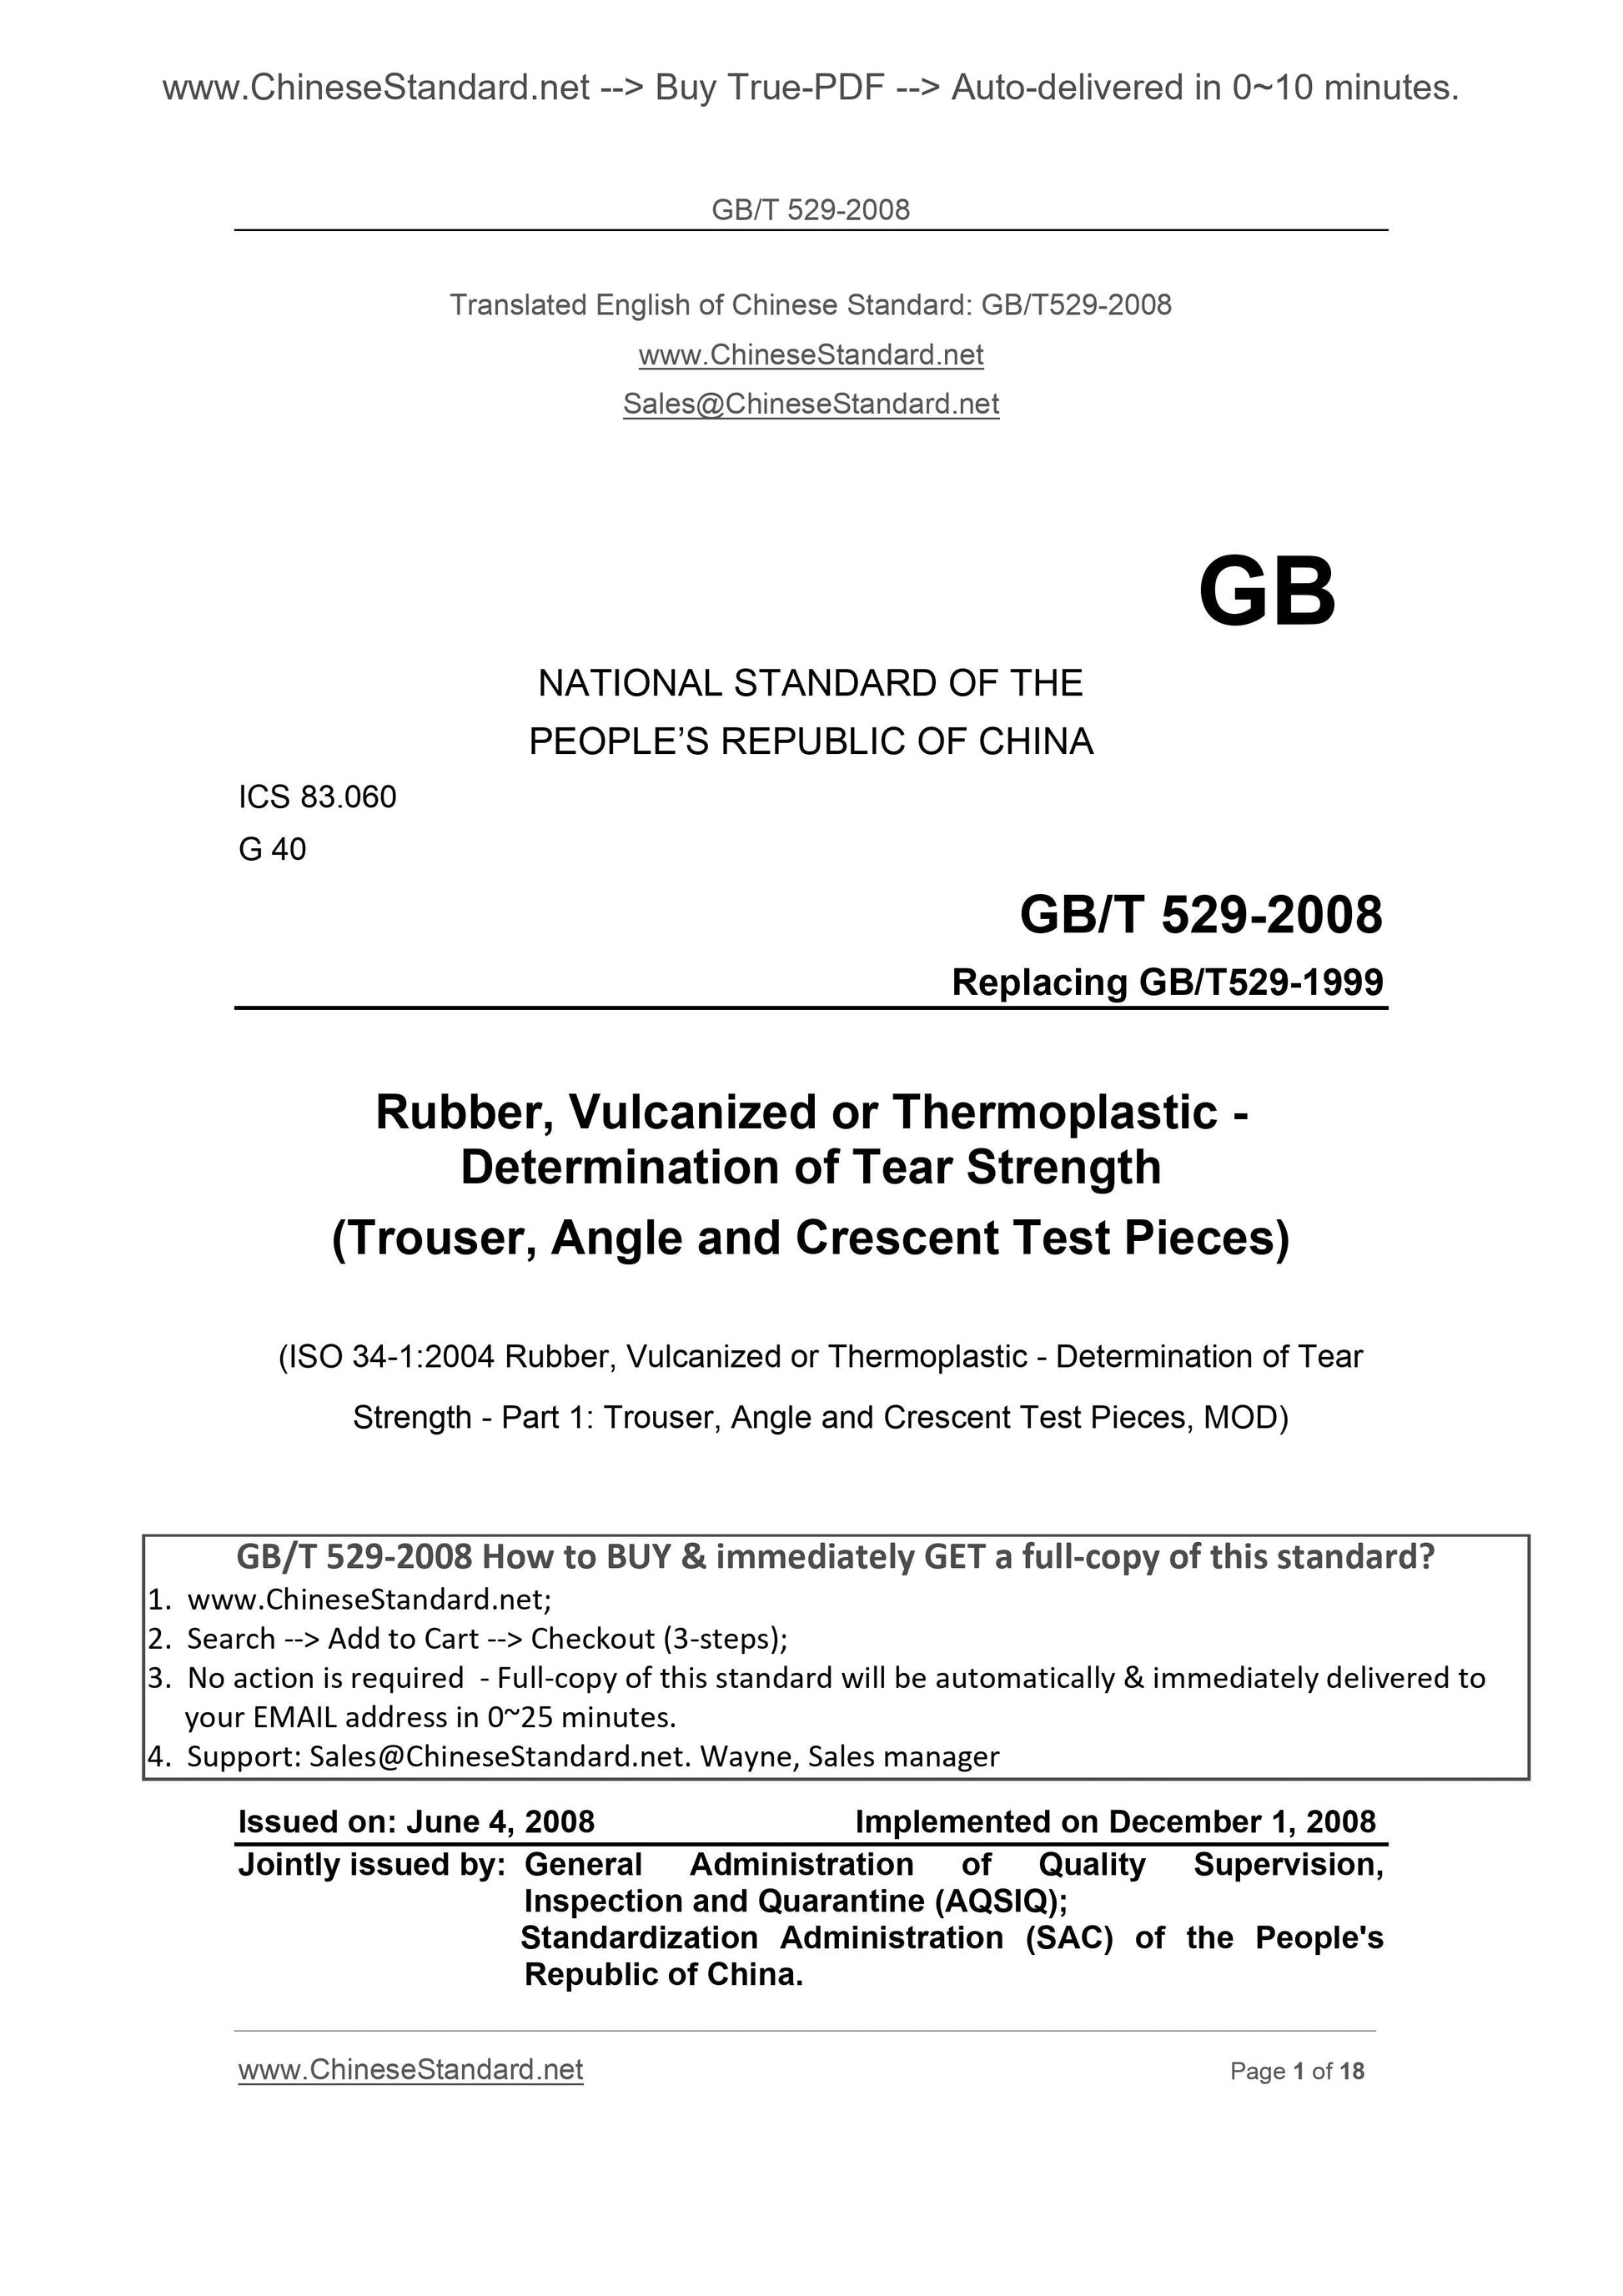 GB/T 529-2008 Page 1